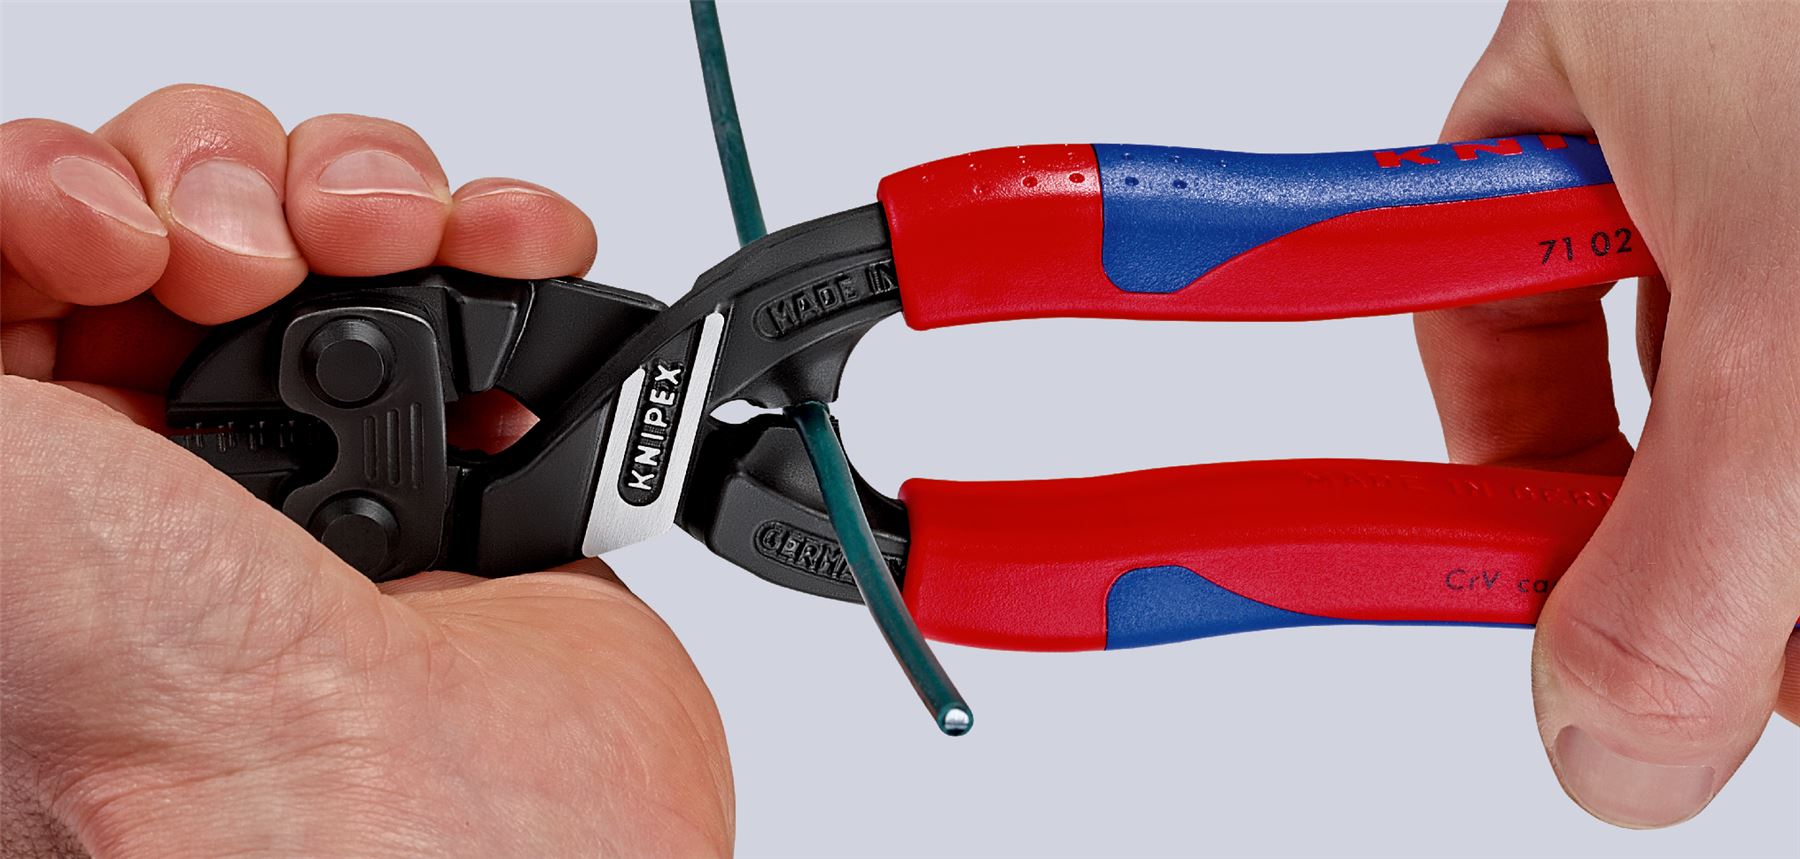 KNIPEX Compact Bolt Cutters CoBolt Cutting Pliers 200mm Multi Component Grips 71 02 200